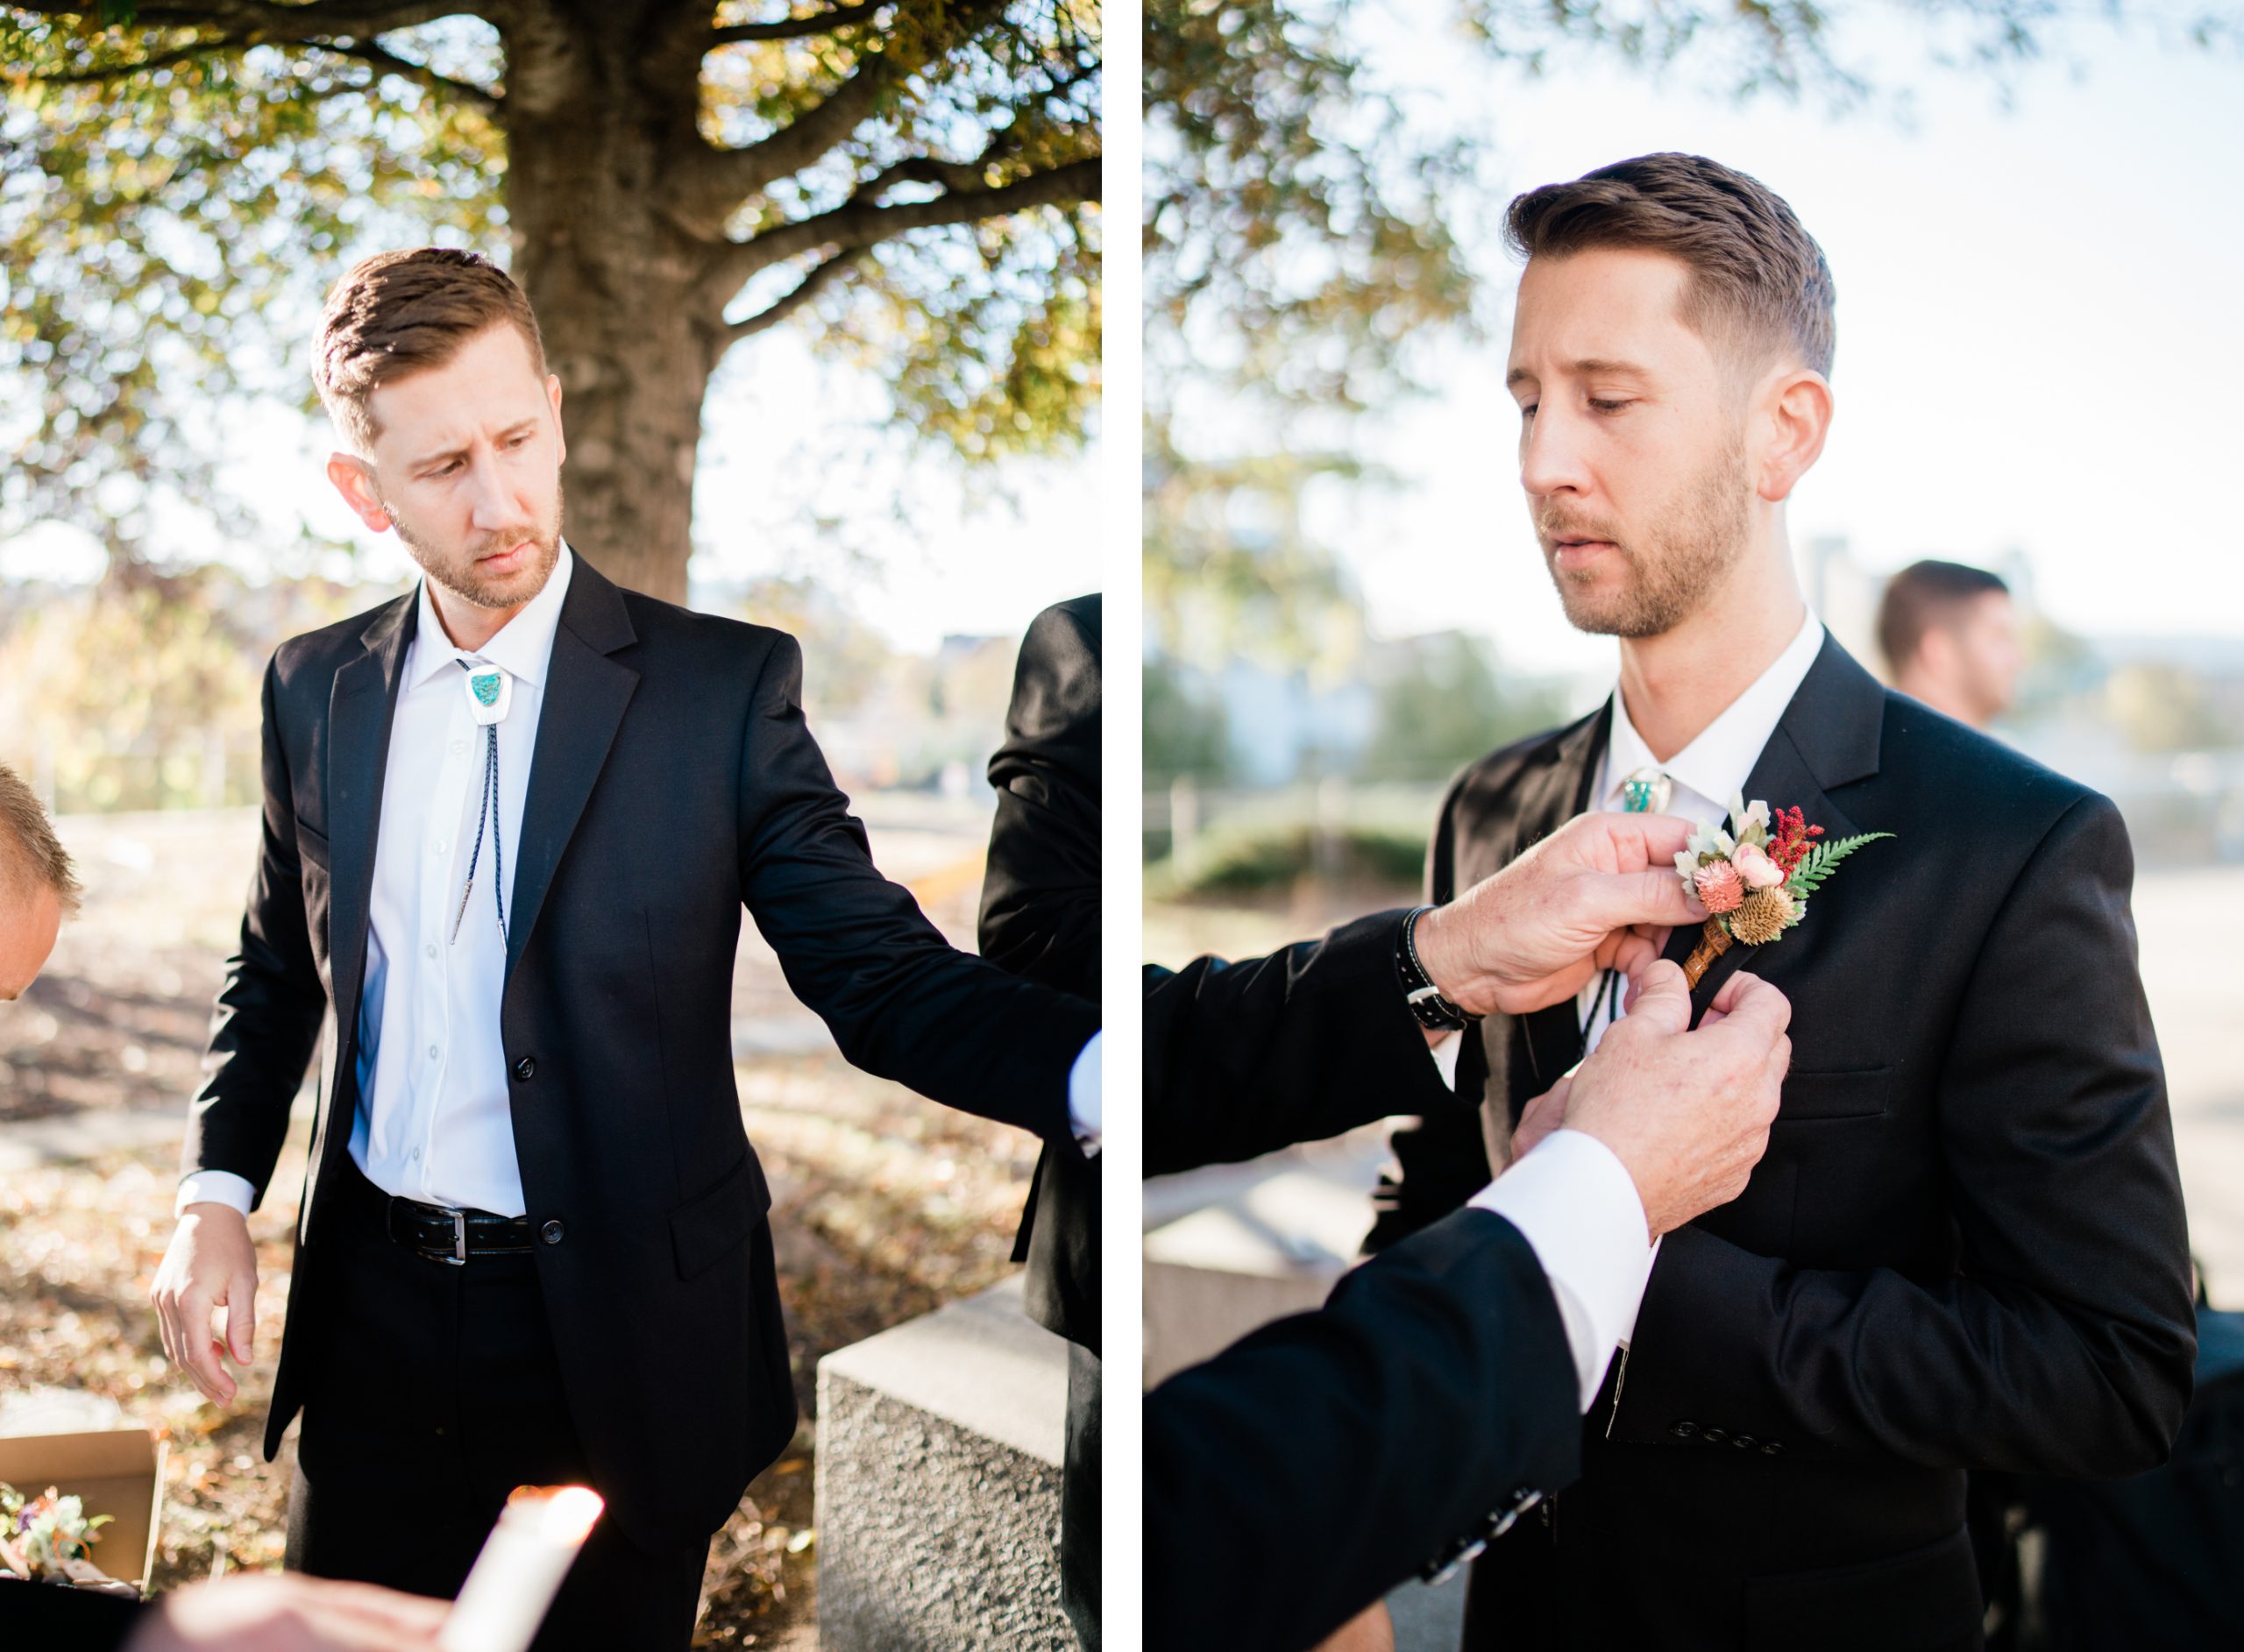 Groom putting on boutonniere 